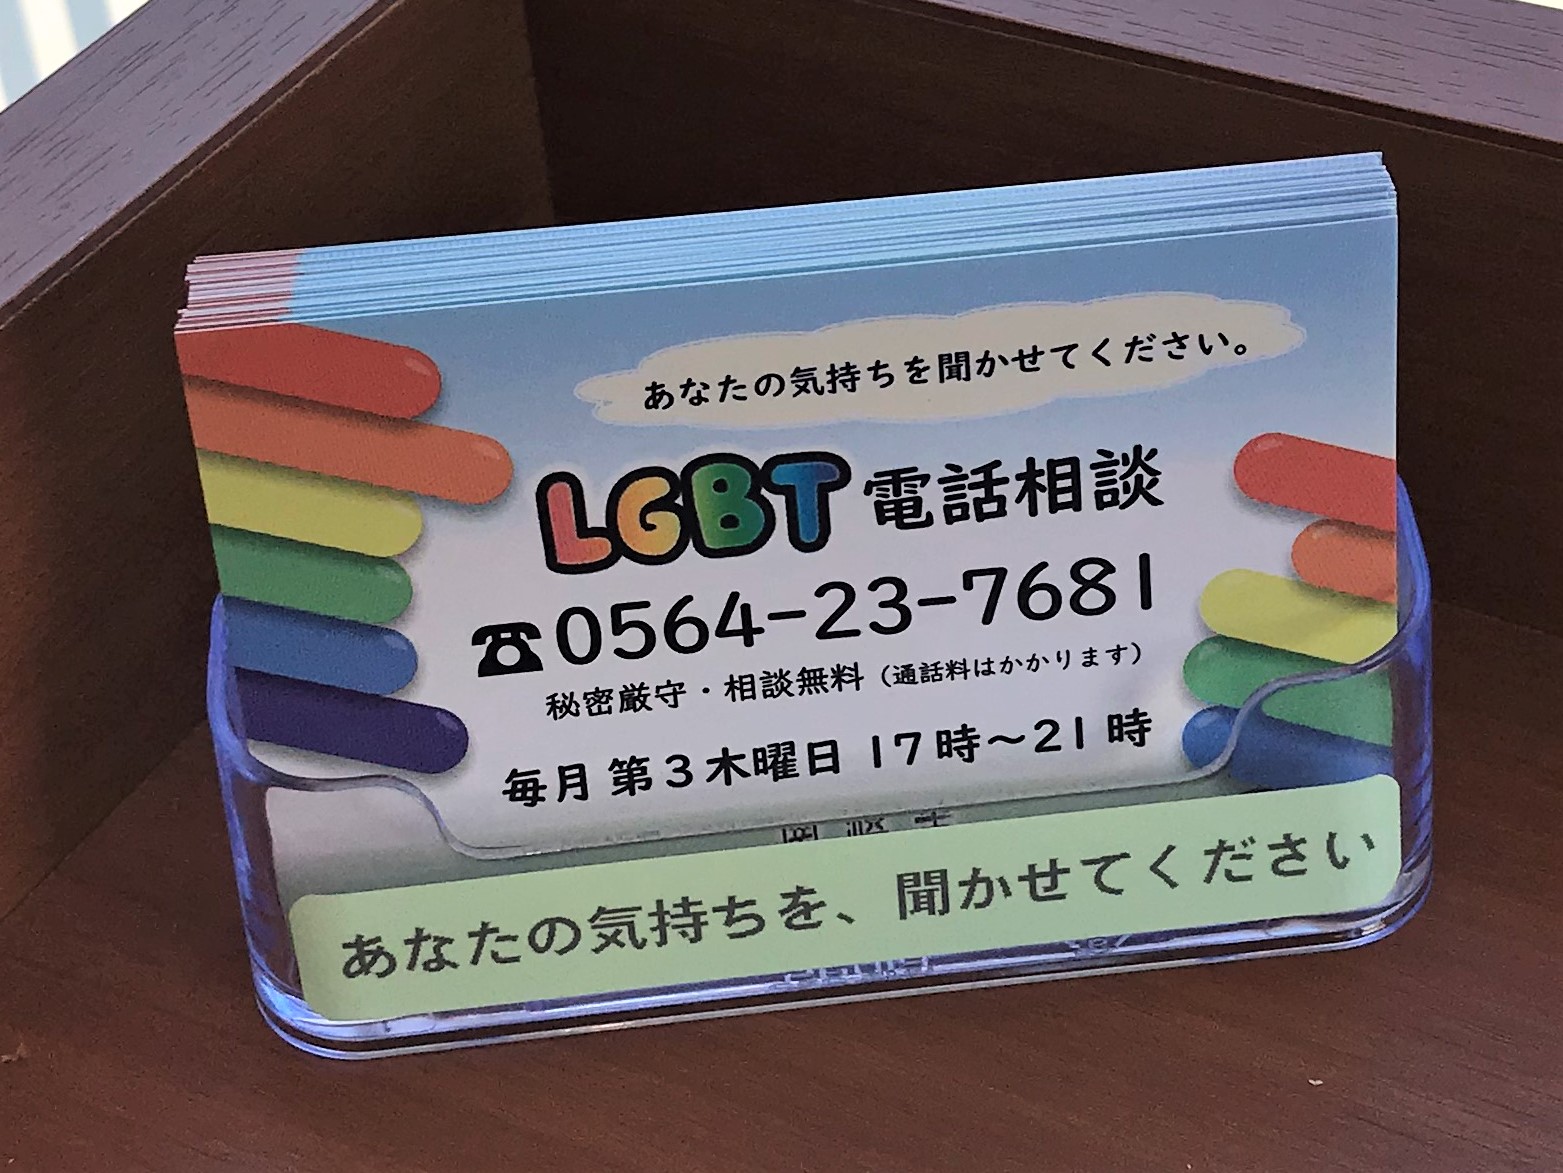 Information cards for the LGBT support line